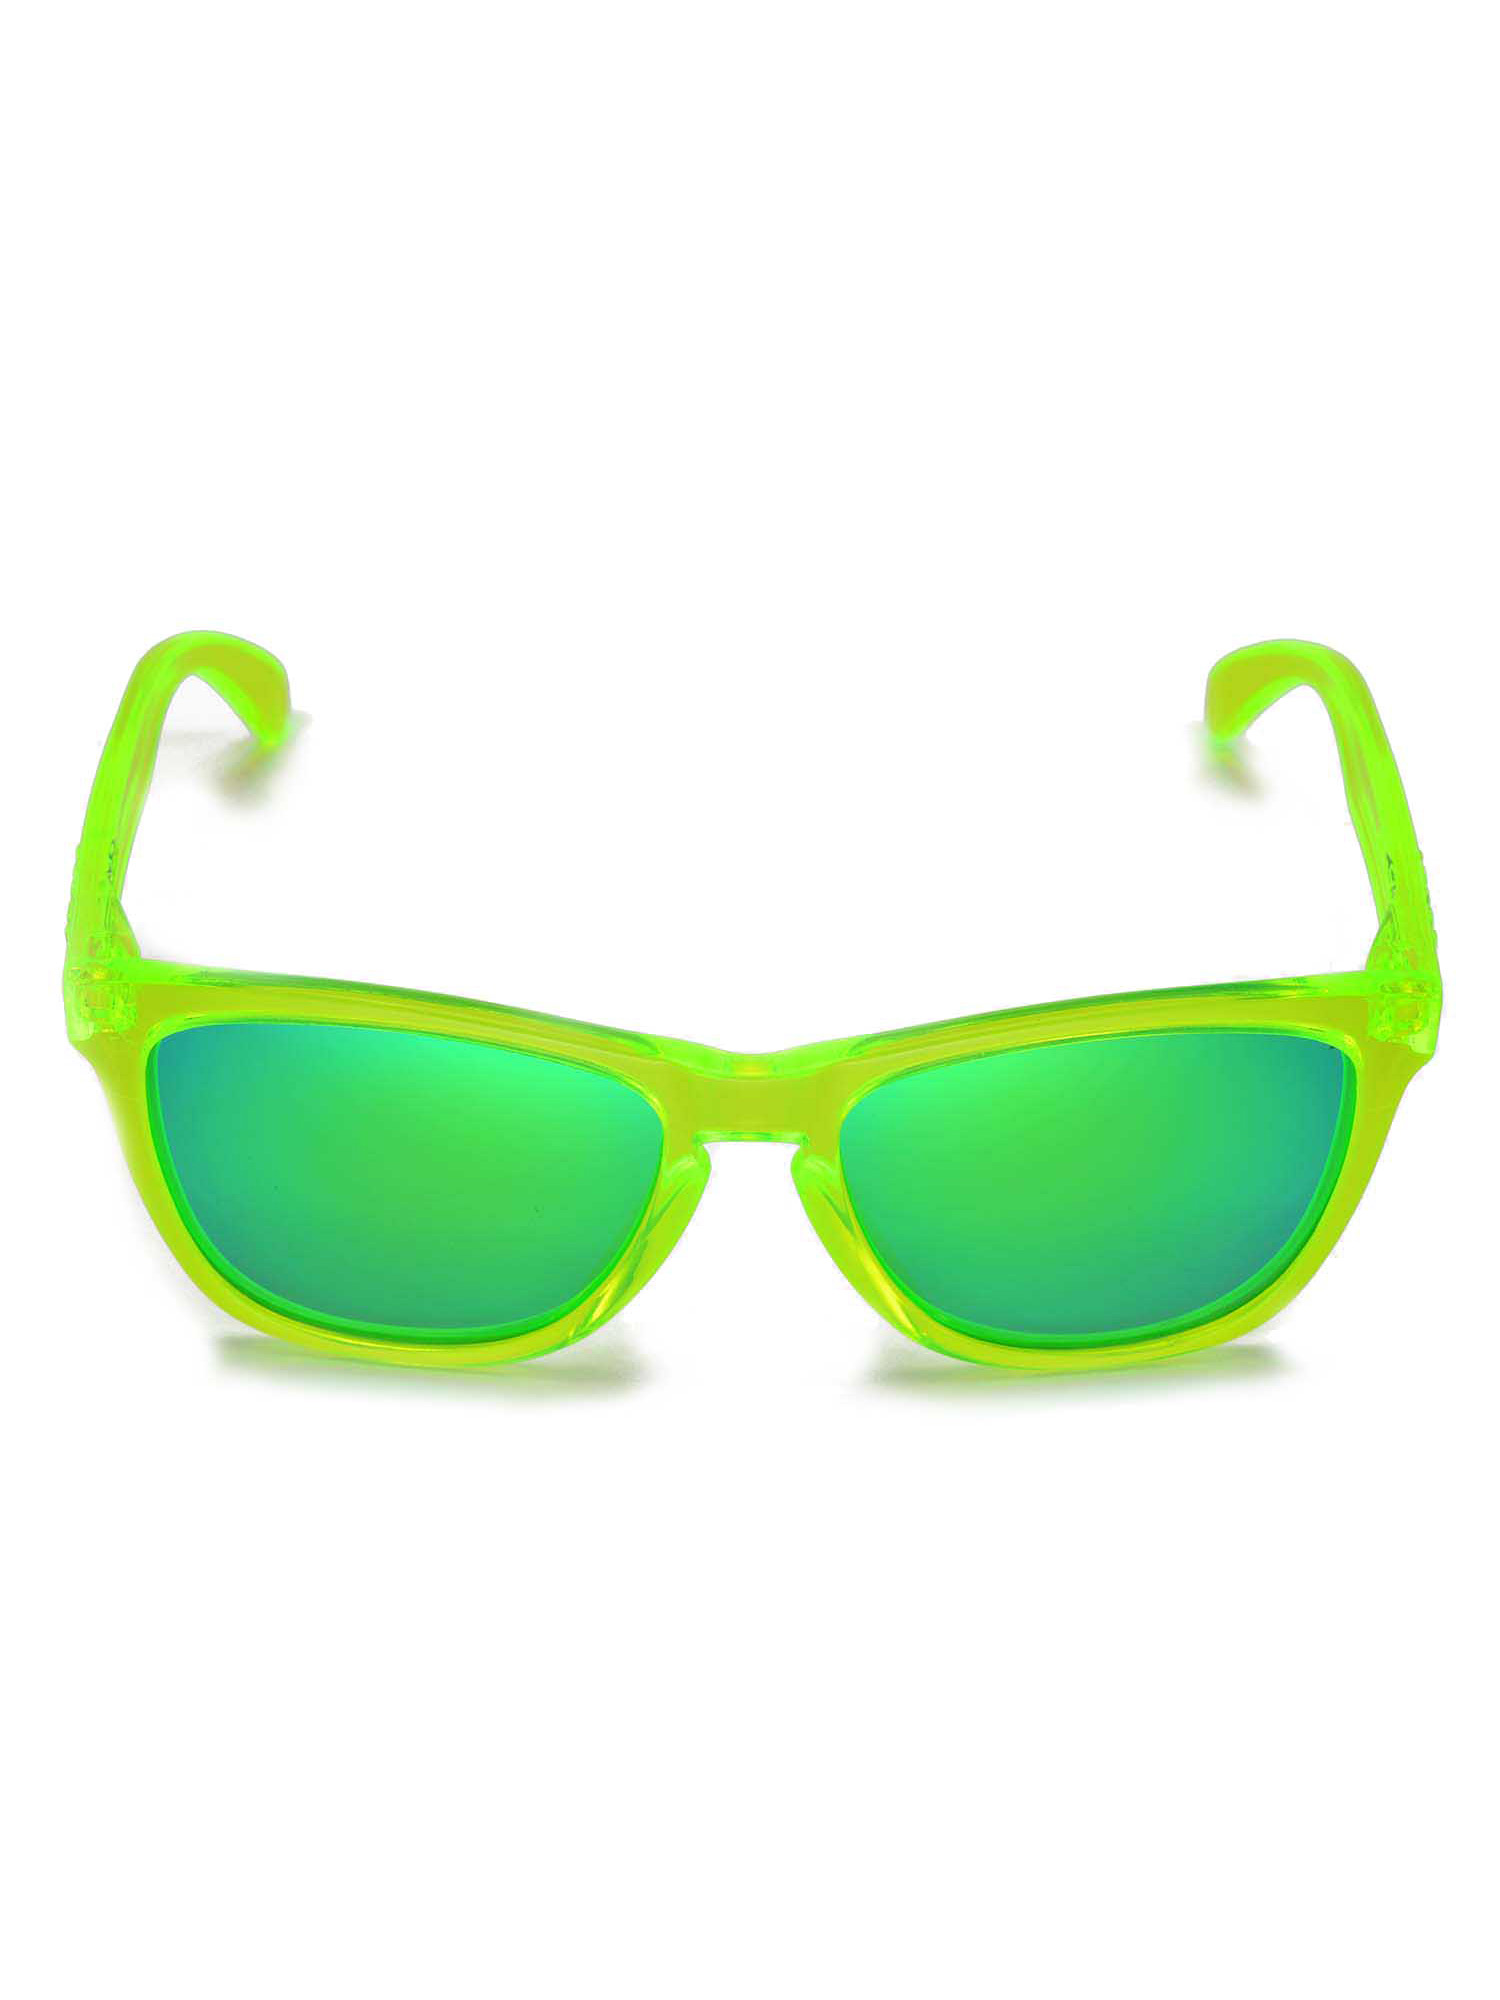 Walleva Emerald Polarized Replacement Lenses for Oakley Frogskins Sunglasses - image 5 of 6